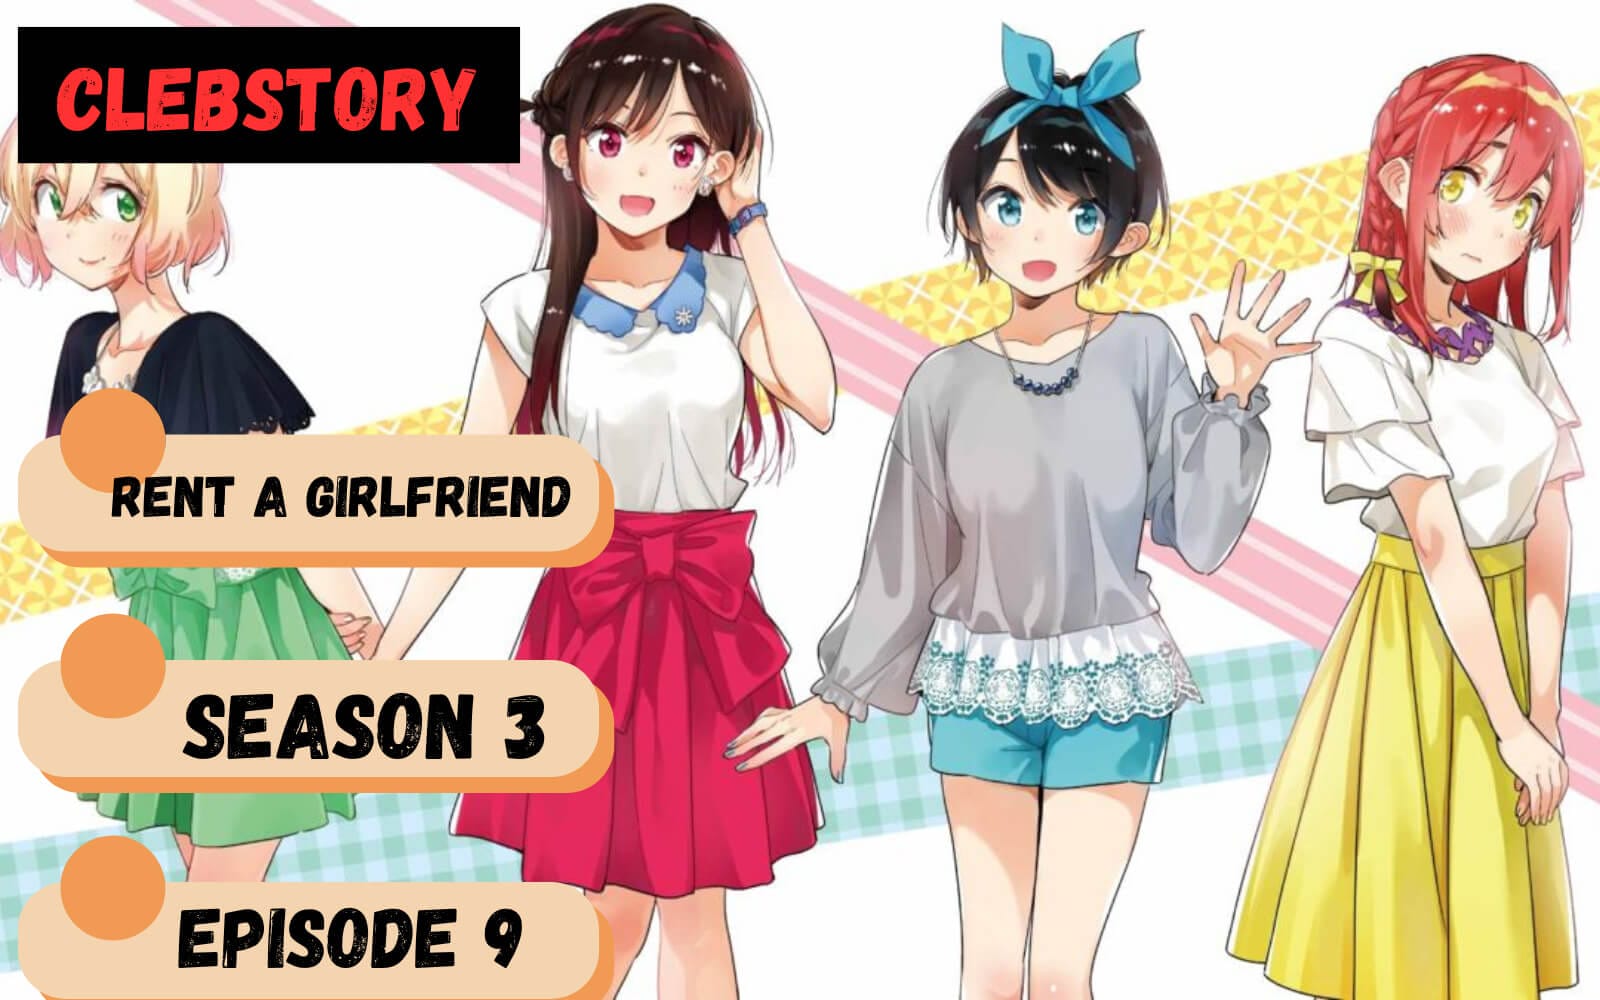 Is There Any Trailer For Rent a Girlfriend Season 3 Episode 9